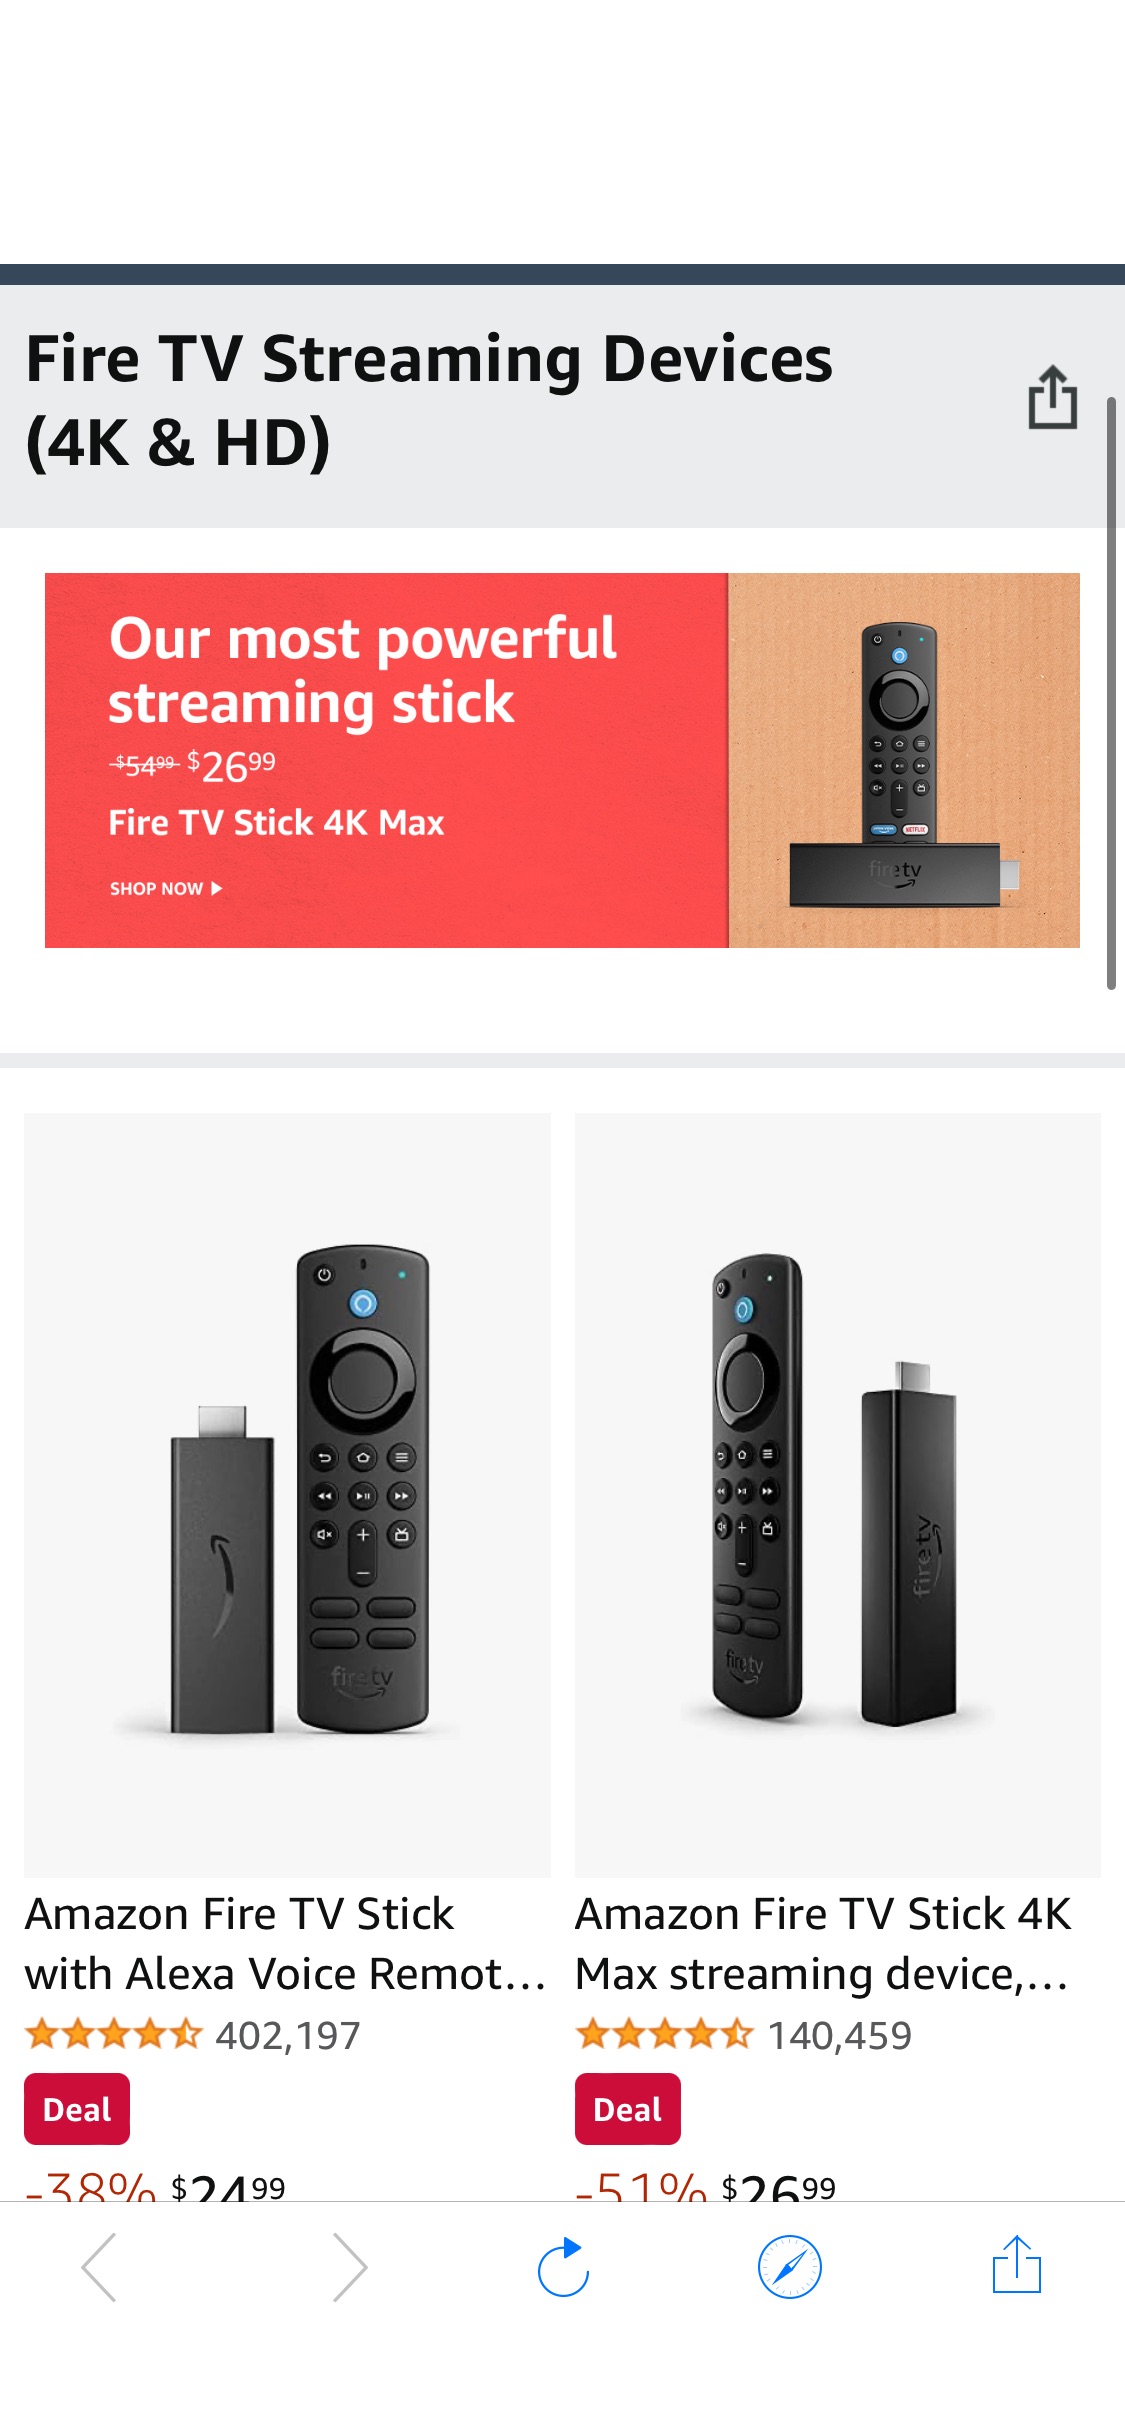 Fire TV Streaming Devices (4K & HD)